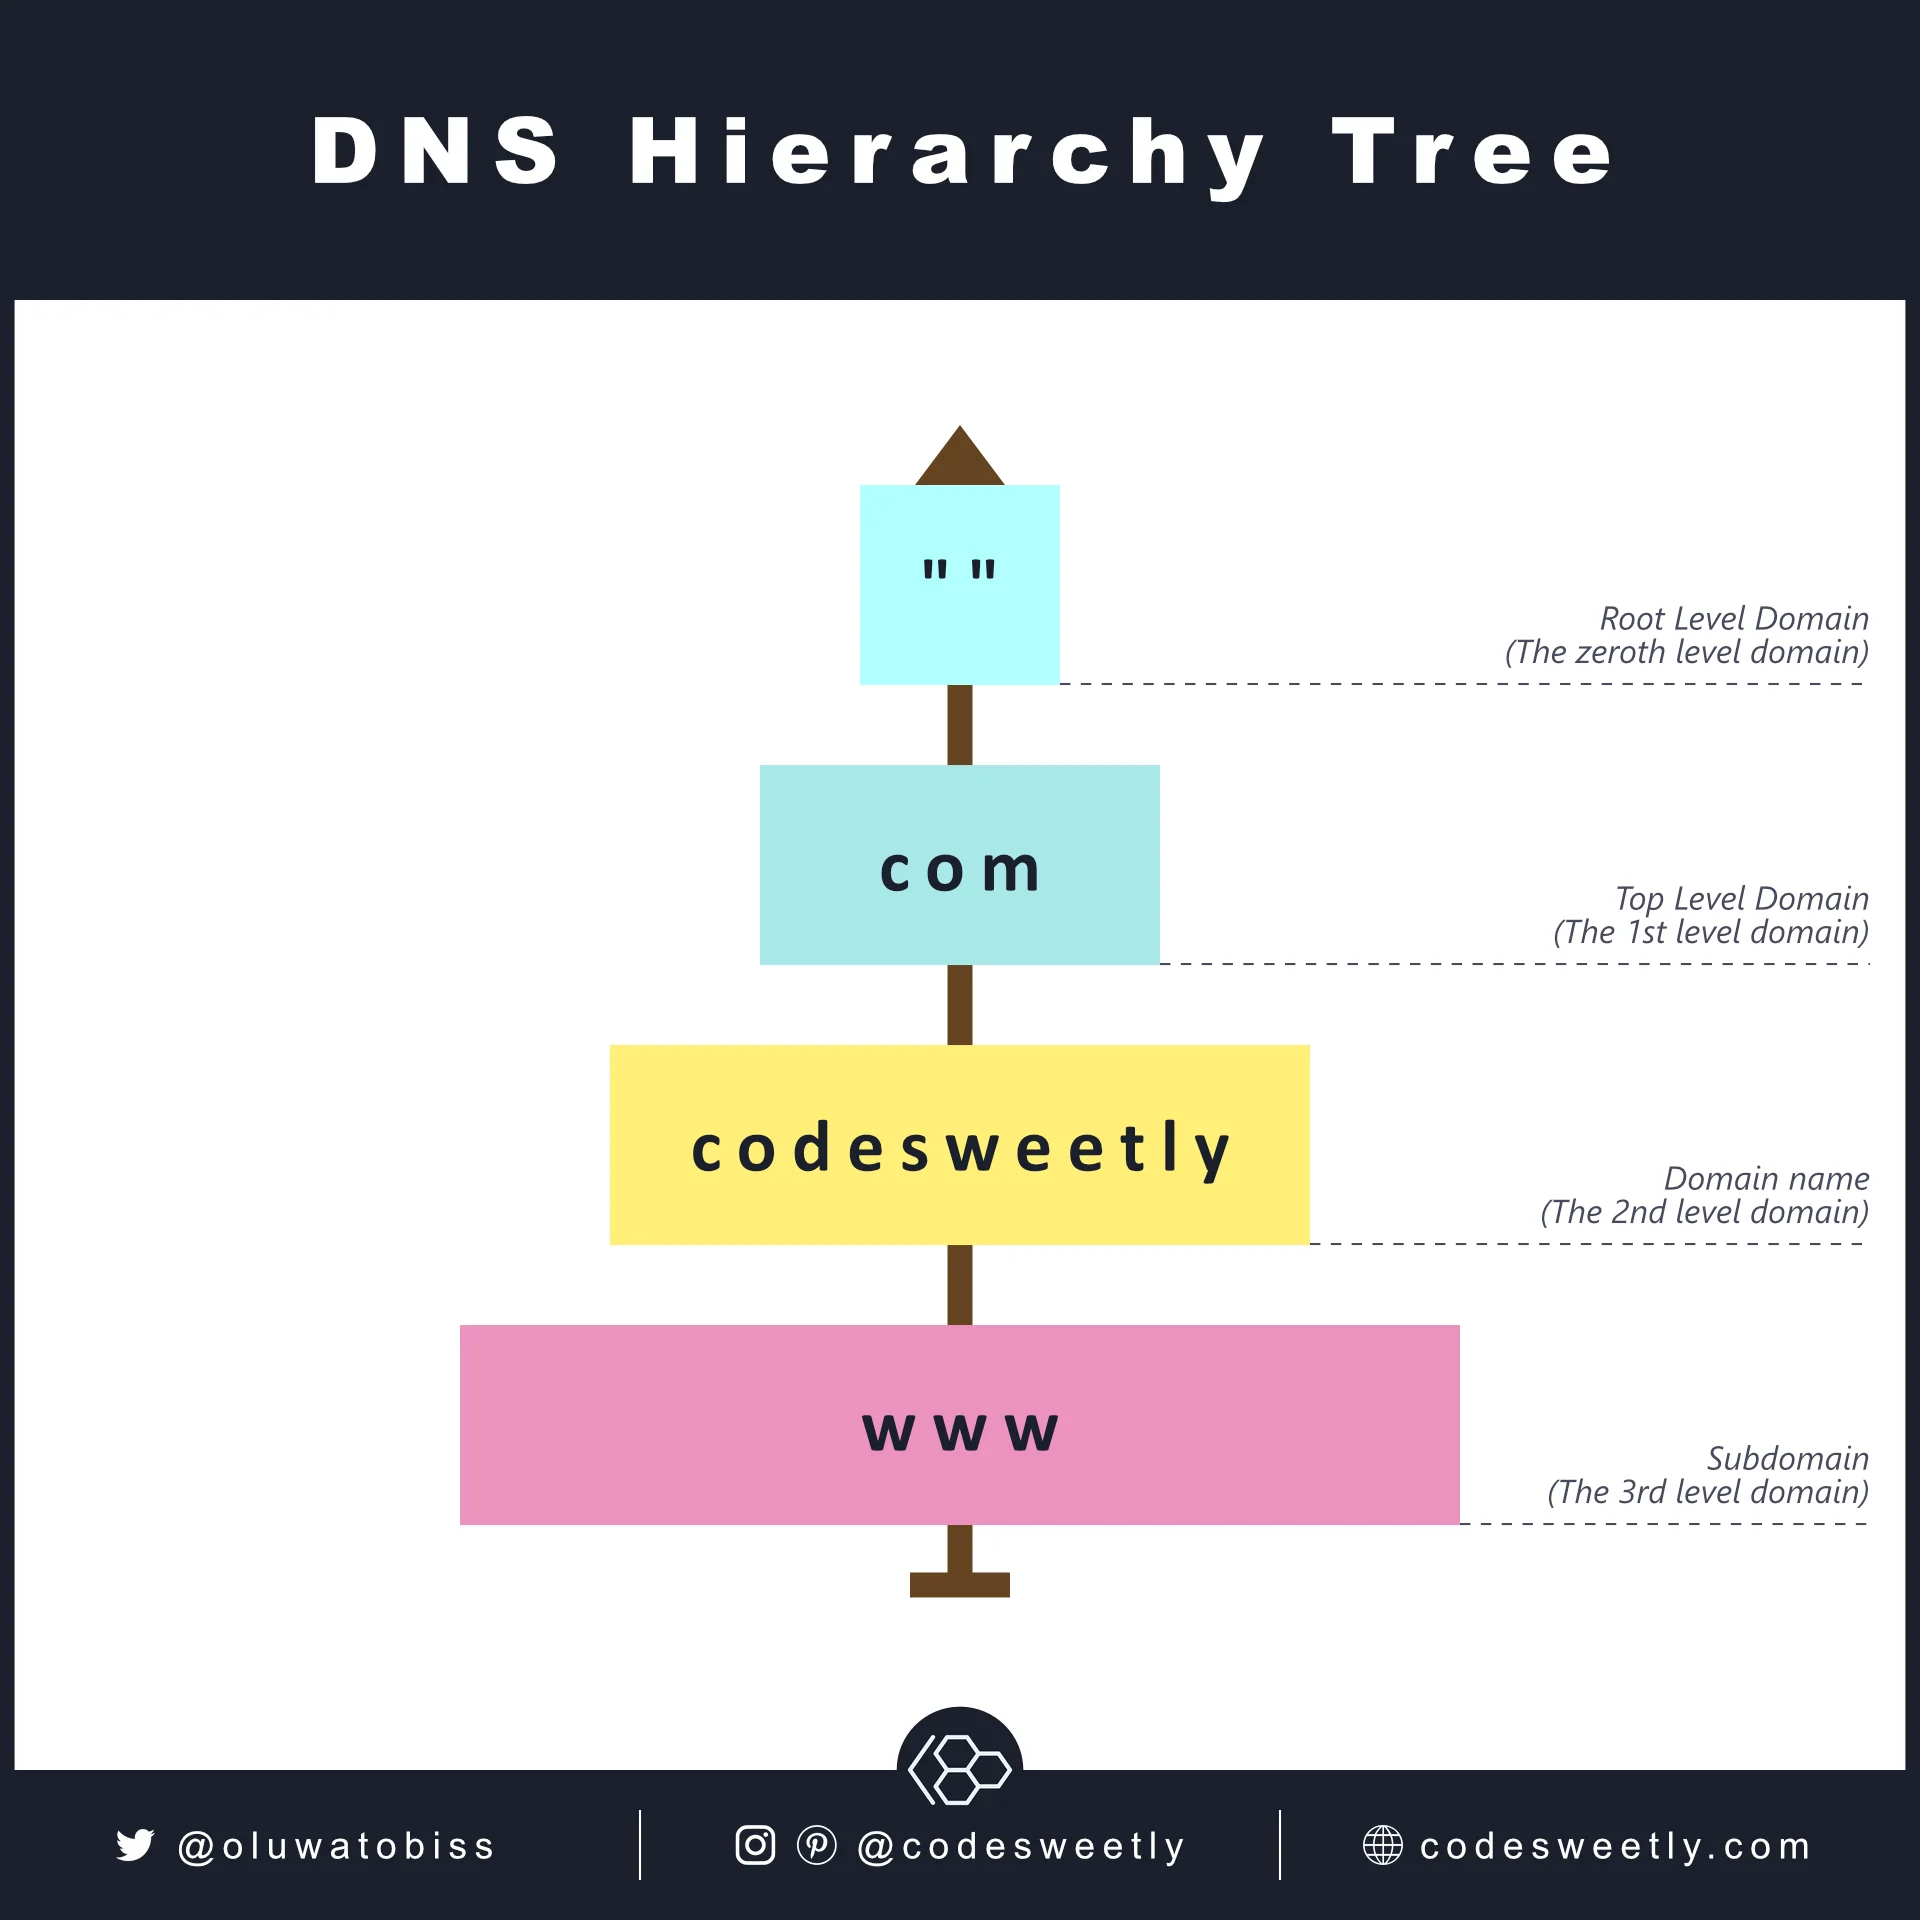 DNS Hierarchy goes from the Root Level Domain to the Top Level Domain to the Domain name and the Subdomain